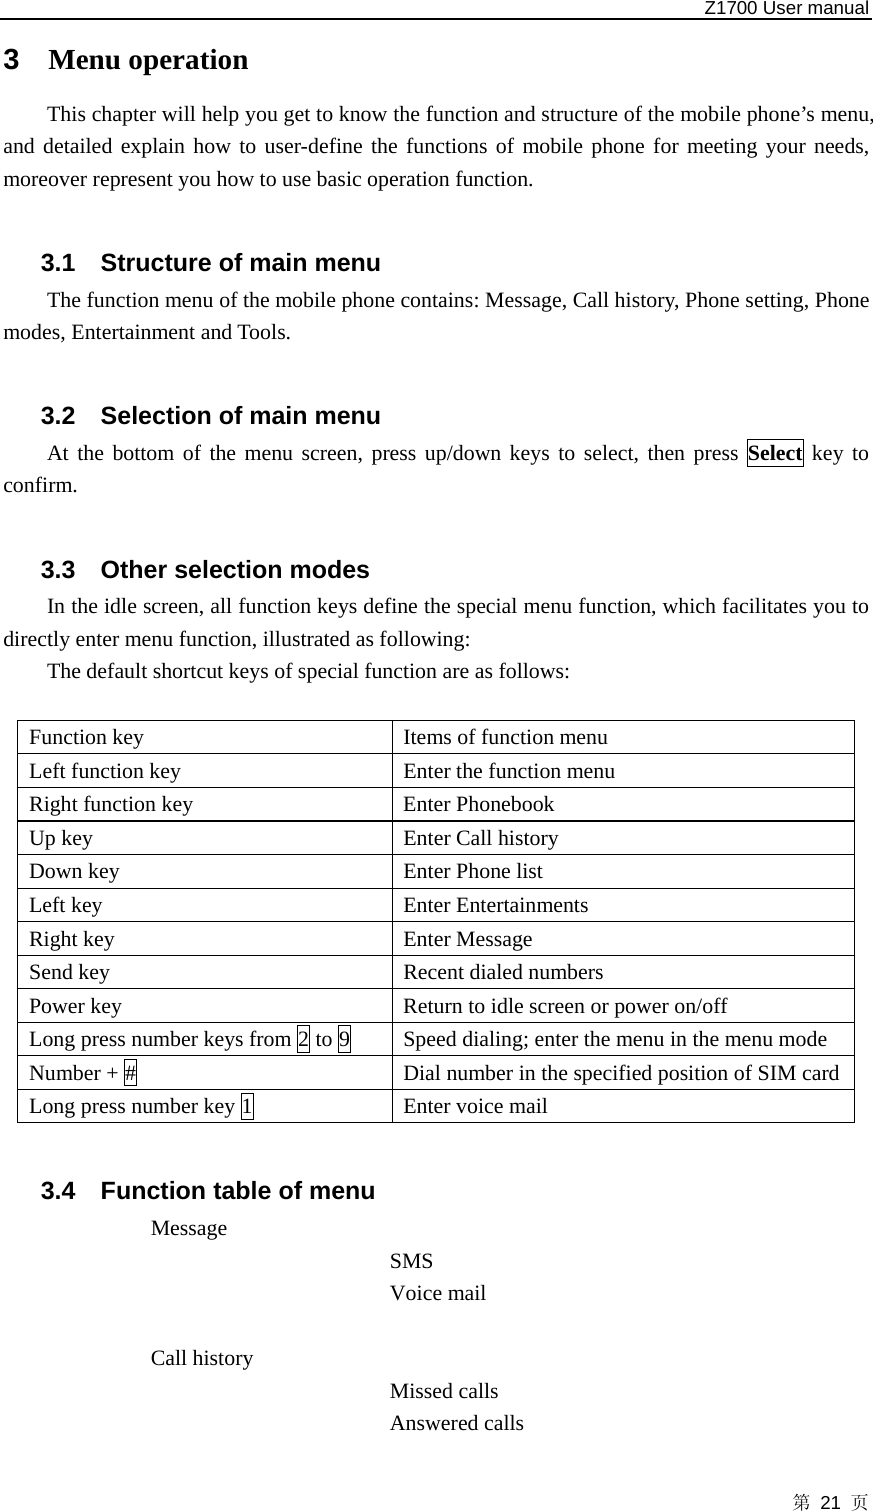   Z1700 User manual 第 21 页 3  Menu operation This chapter will help you get to know the function and structure of the mobile phone’s menu, and detailed explain how to user-define the functions of mobile phone for meeting your needs, moreover represent you how to use basic operation function.  3.1  Structure of main menu The function menu of the mobile phone contains: Message, Call history, Phone setting, Phone modes, Entertainment and Tools.  3.2  Selection of main menu At the bottom of the menu screen, press up/down keys to select, then press Select key to confirm.  3.3  Other selection modes In the idle screen, all function keys define the special menu function, which facilitates you to directly enter menu function, illustrated as following:   The default shortcut keys of special function are as follows:  Function key  Items of function menu   Left function key  Enter the function menu Right function key  Enter Phonebook Up key  Enter Call history Down key  Enter Phone list Left key  Enter Entertainments Right key  Enter Message Send key  Recent dialed numbers Power key  Return to idle screen or power on/off Long press number keys from 2 to 9    Speed dialing; enter the menu in the menu mode Number + #  Dial number in the specified position of SIM card Long press number key 1    Enter voice mail    3.4  Function table of menu Message  SMS Voice mail  Call history     Missed calls   Answered calls   